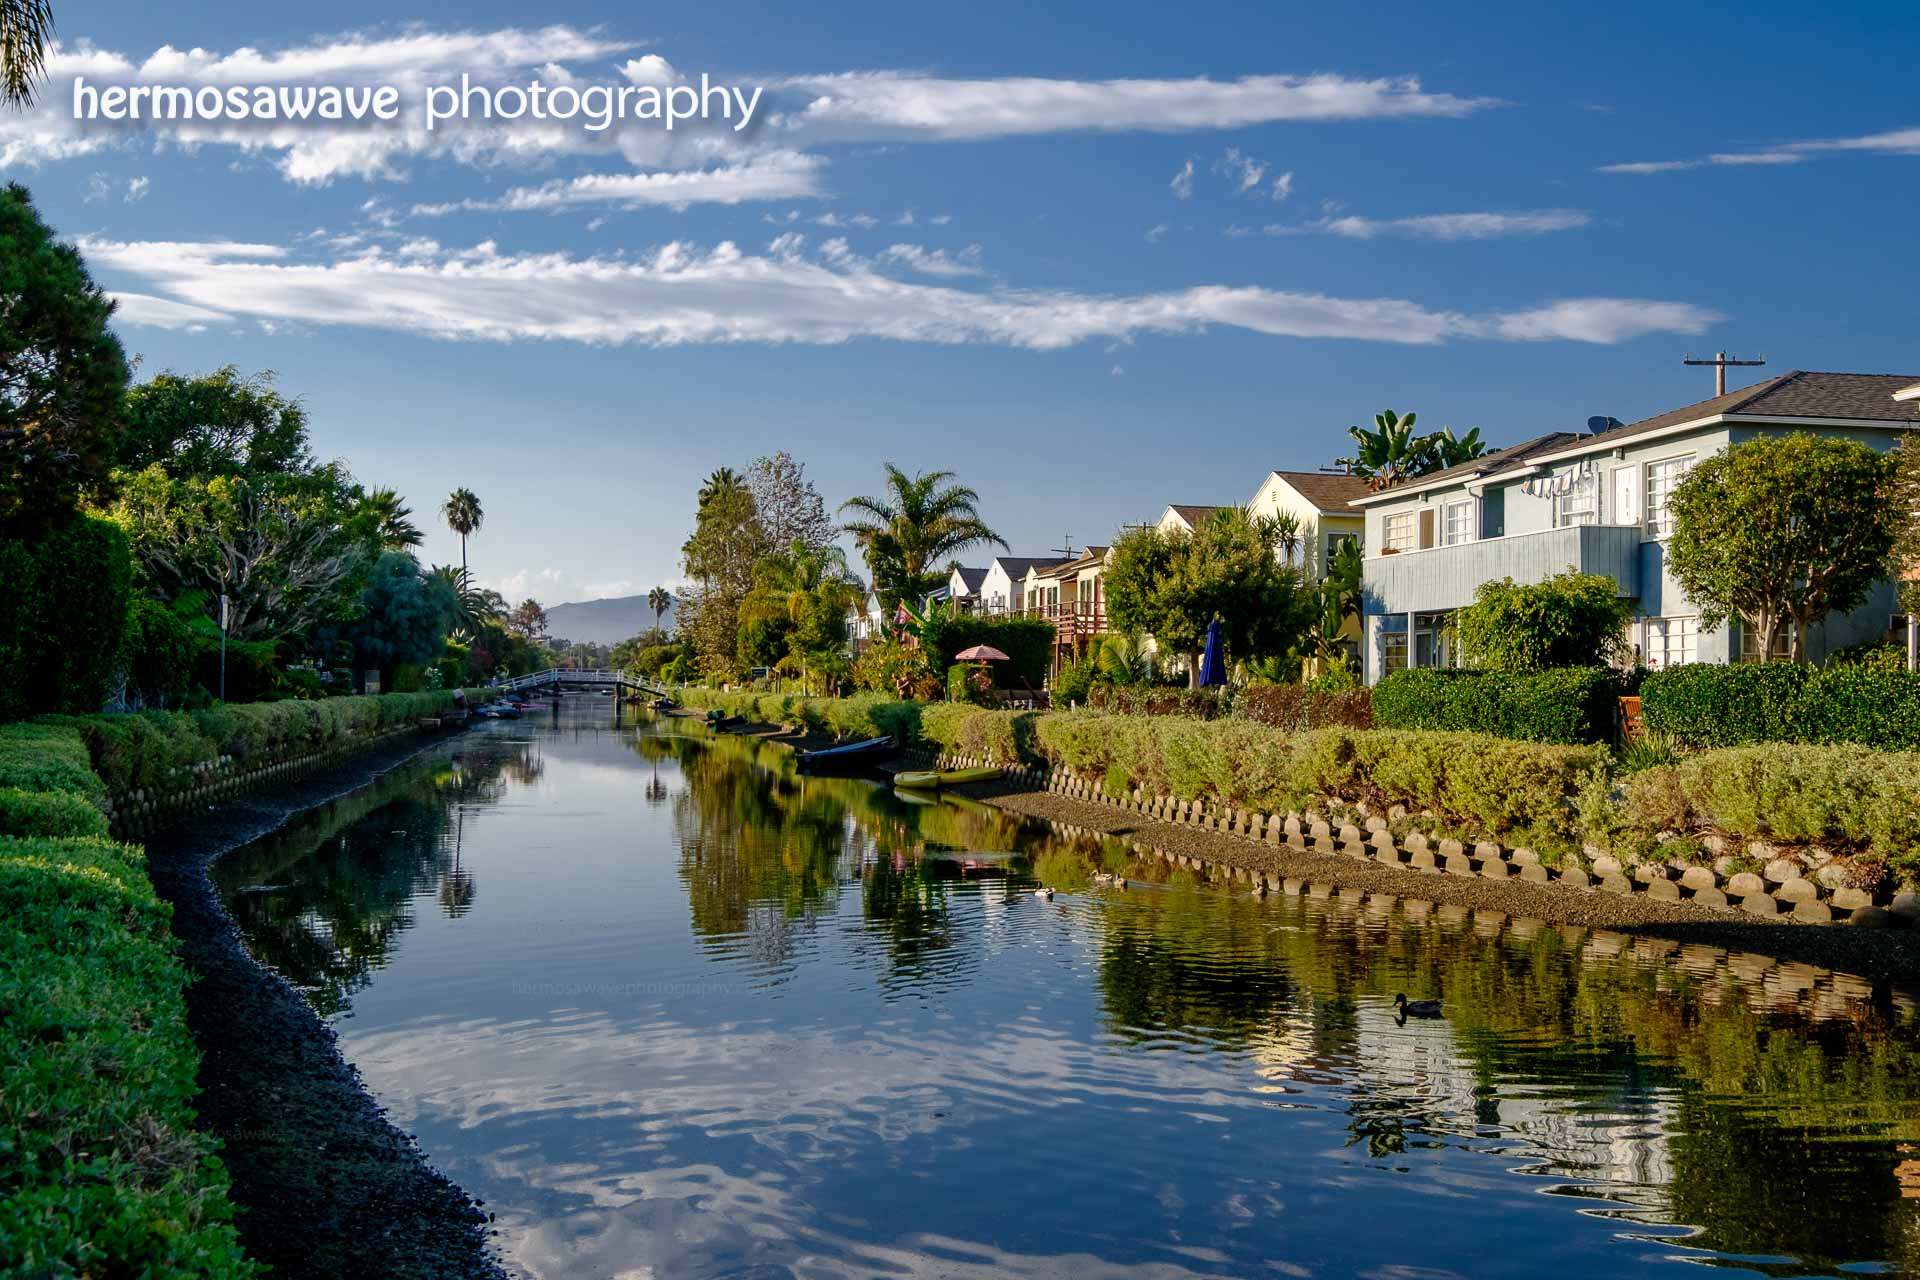 Afternoon on the Venice Canals